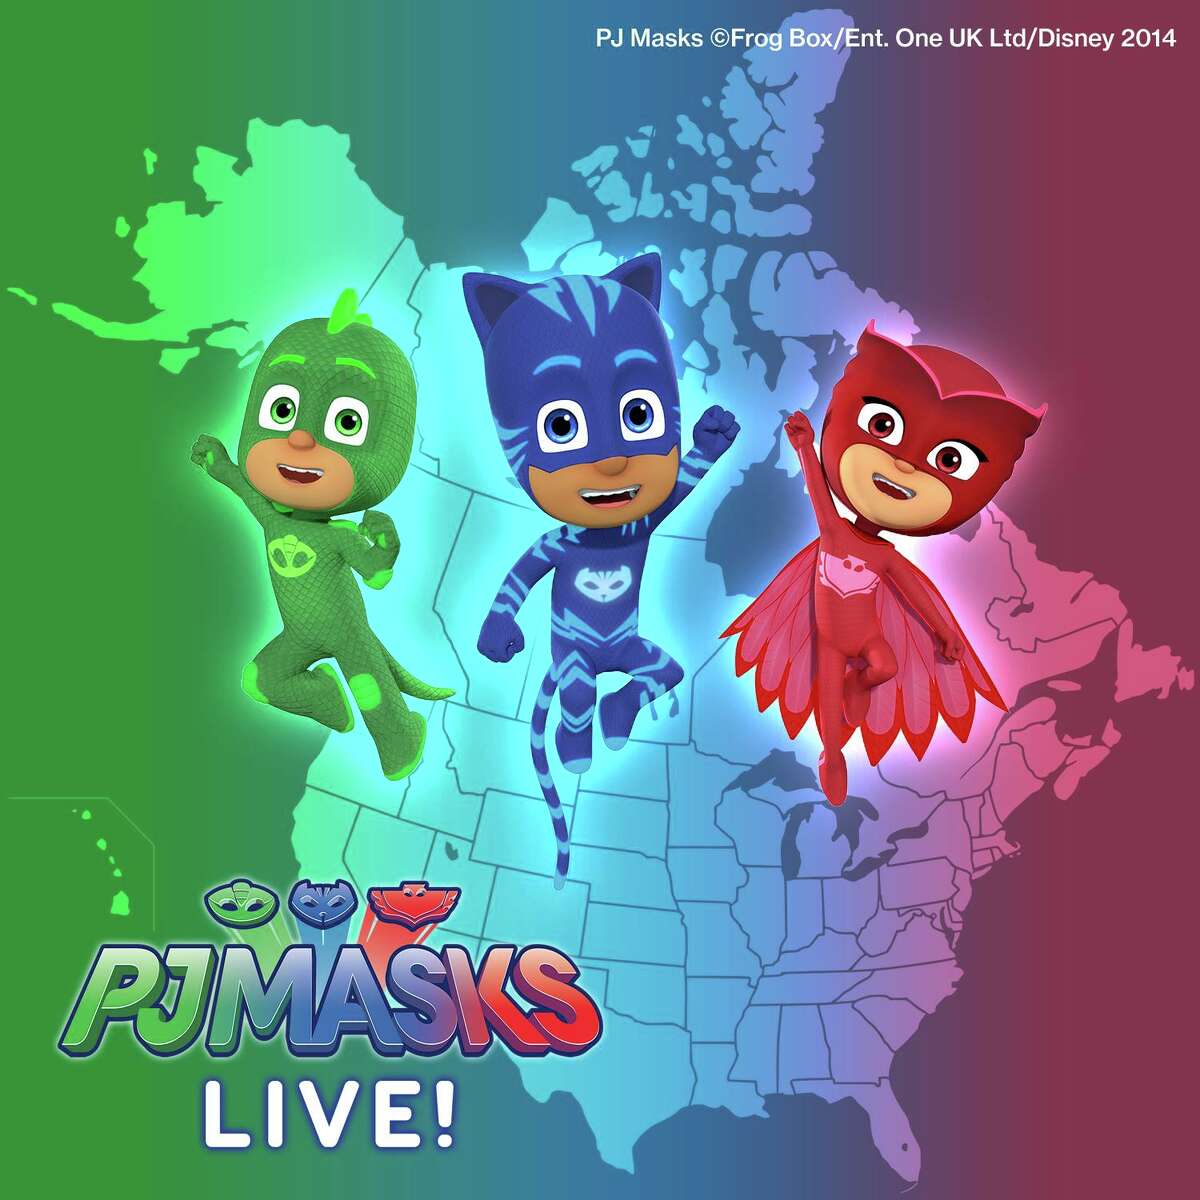 Disney's 'PJ Masks' is finally coming to the stage